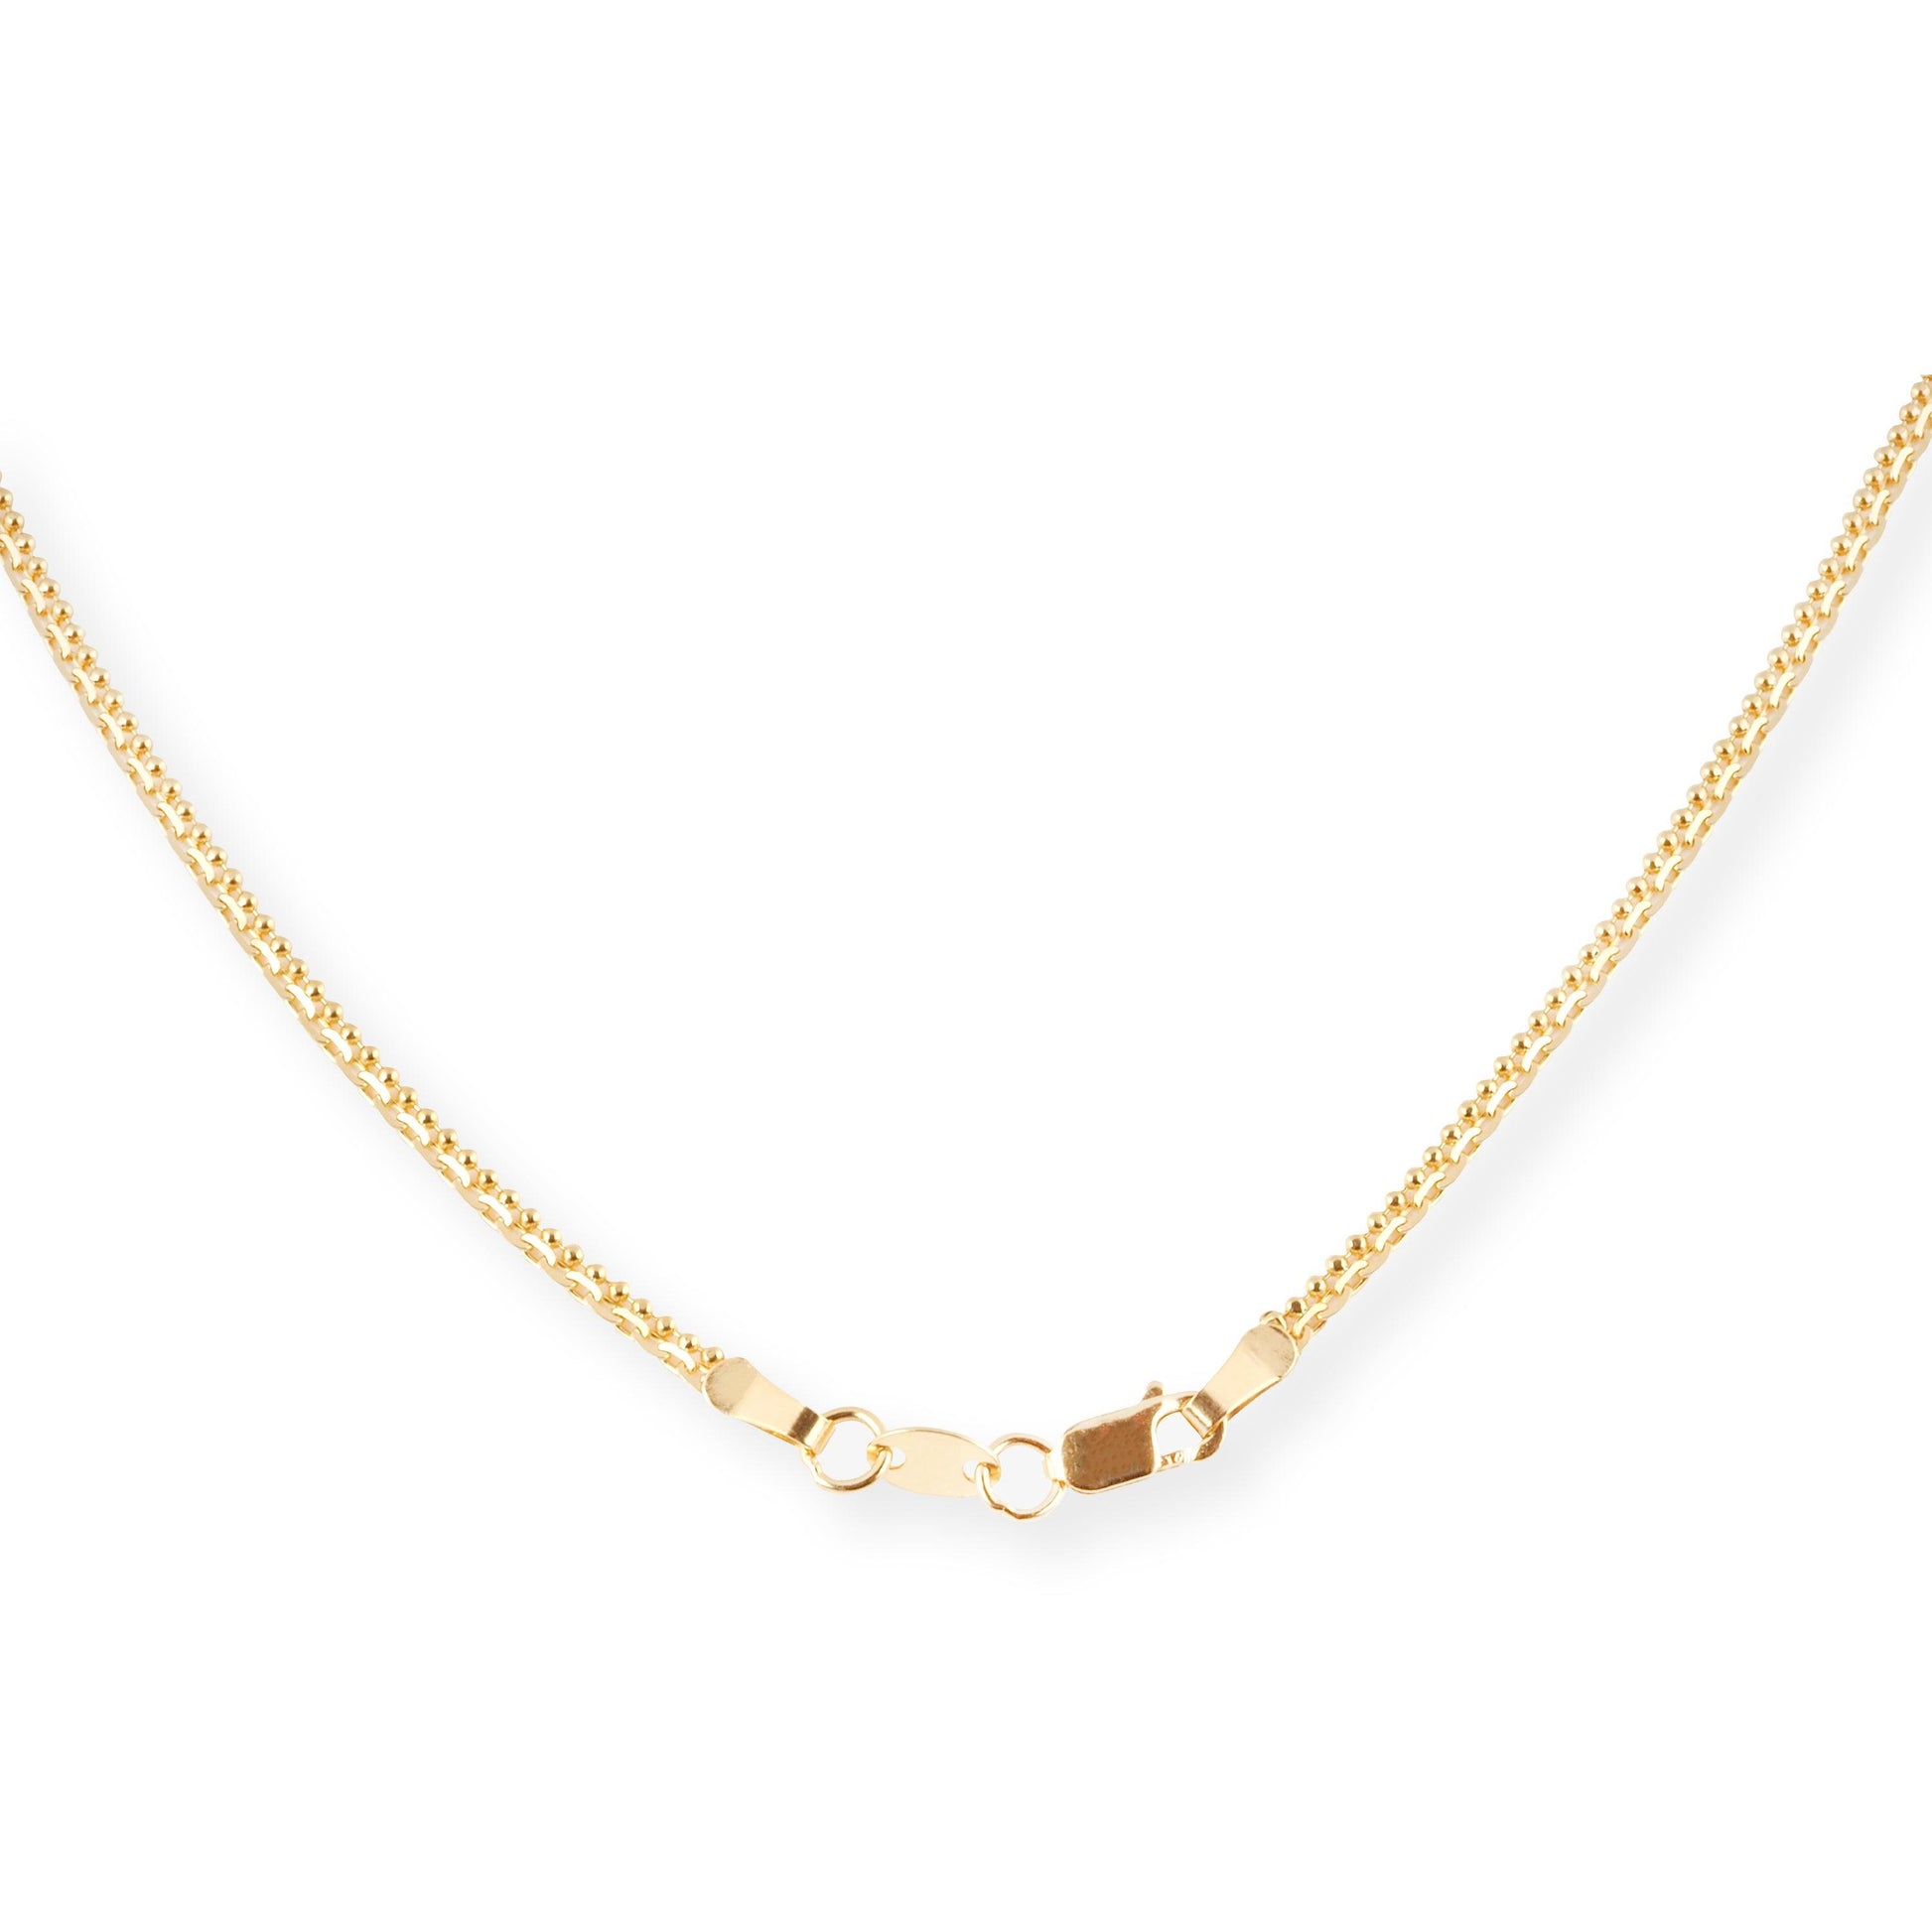 22ct Gold Link Design Chain with Lobster Clasp C-3823 - Minar Jewellers